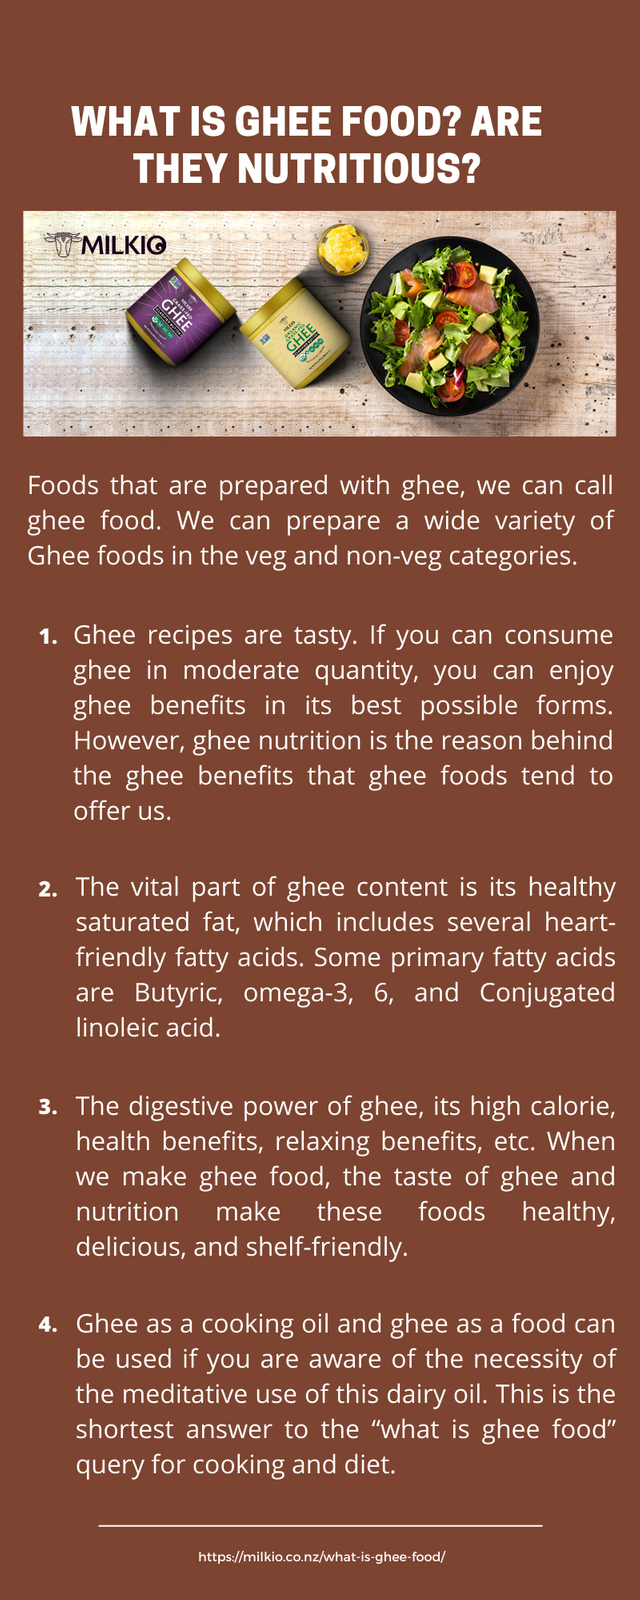 what is ghee food infographic.png